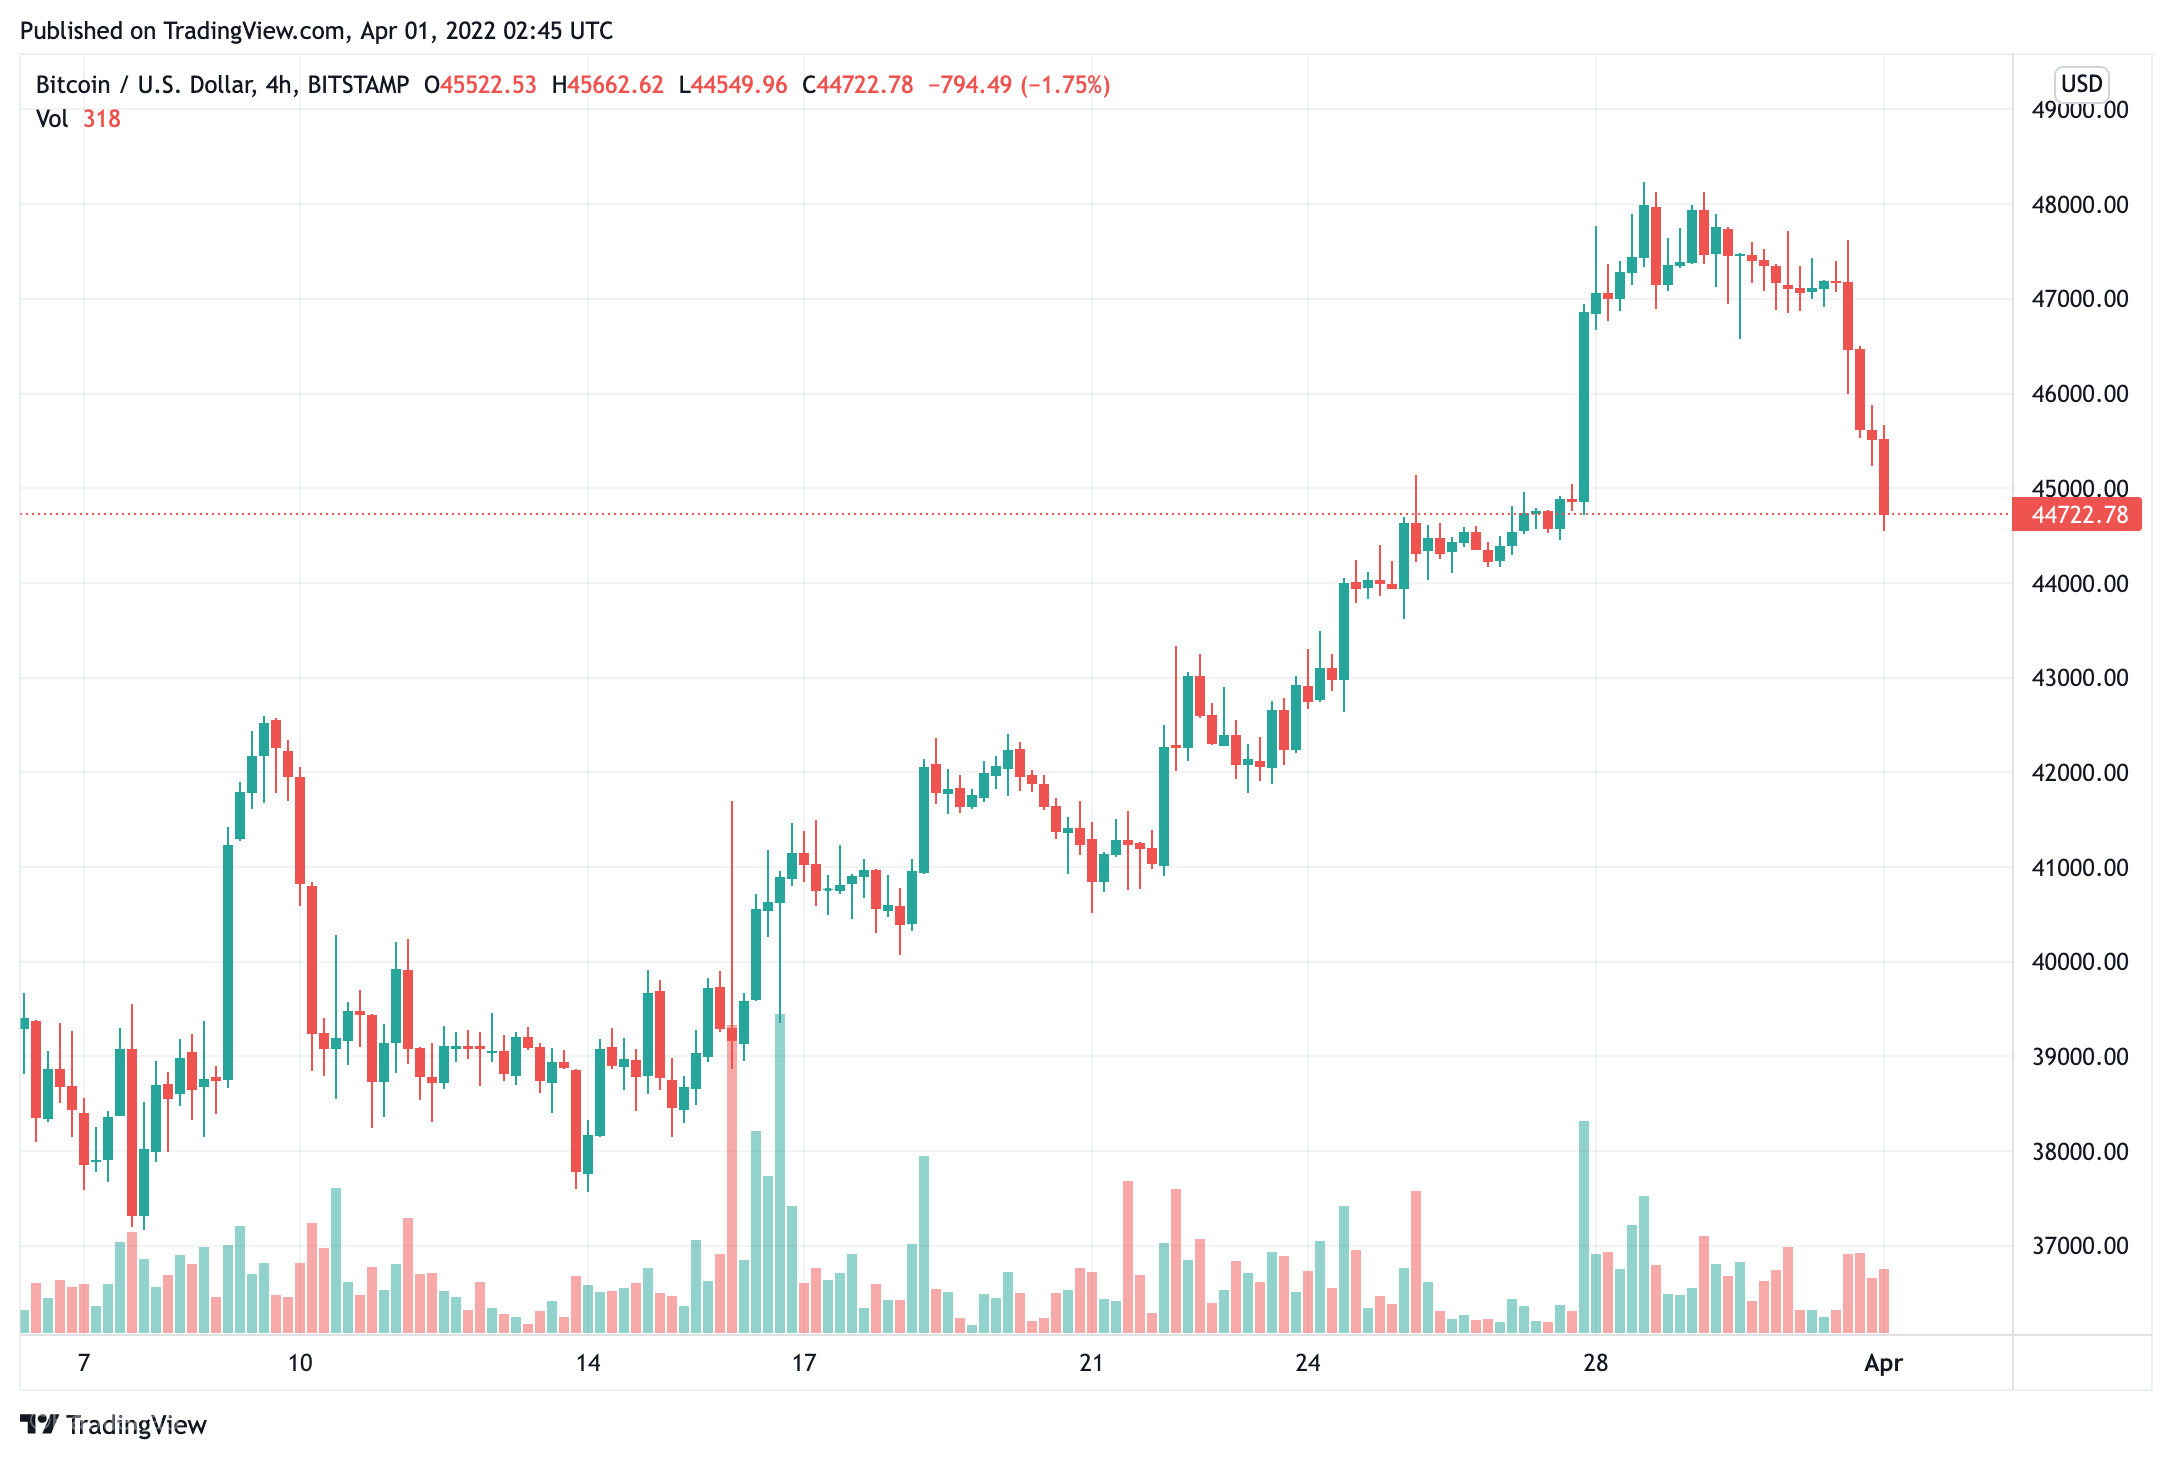 bitcoin-price-fell-for-a-second-day-in-a-row-retreating-after-its-price-passed-48000-earlier-this-week